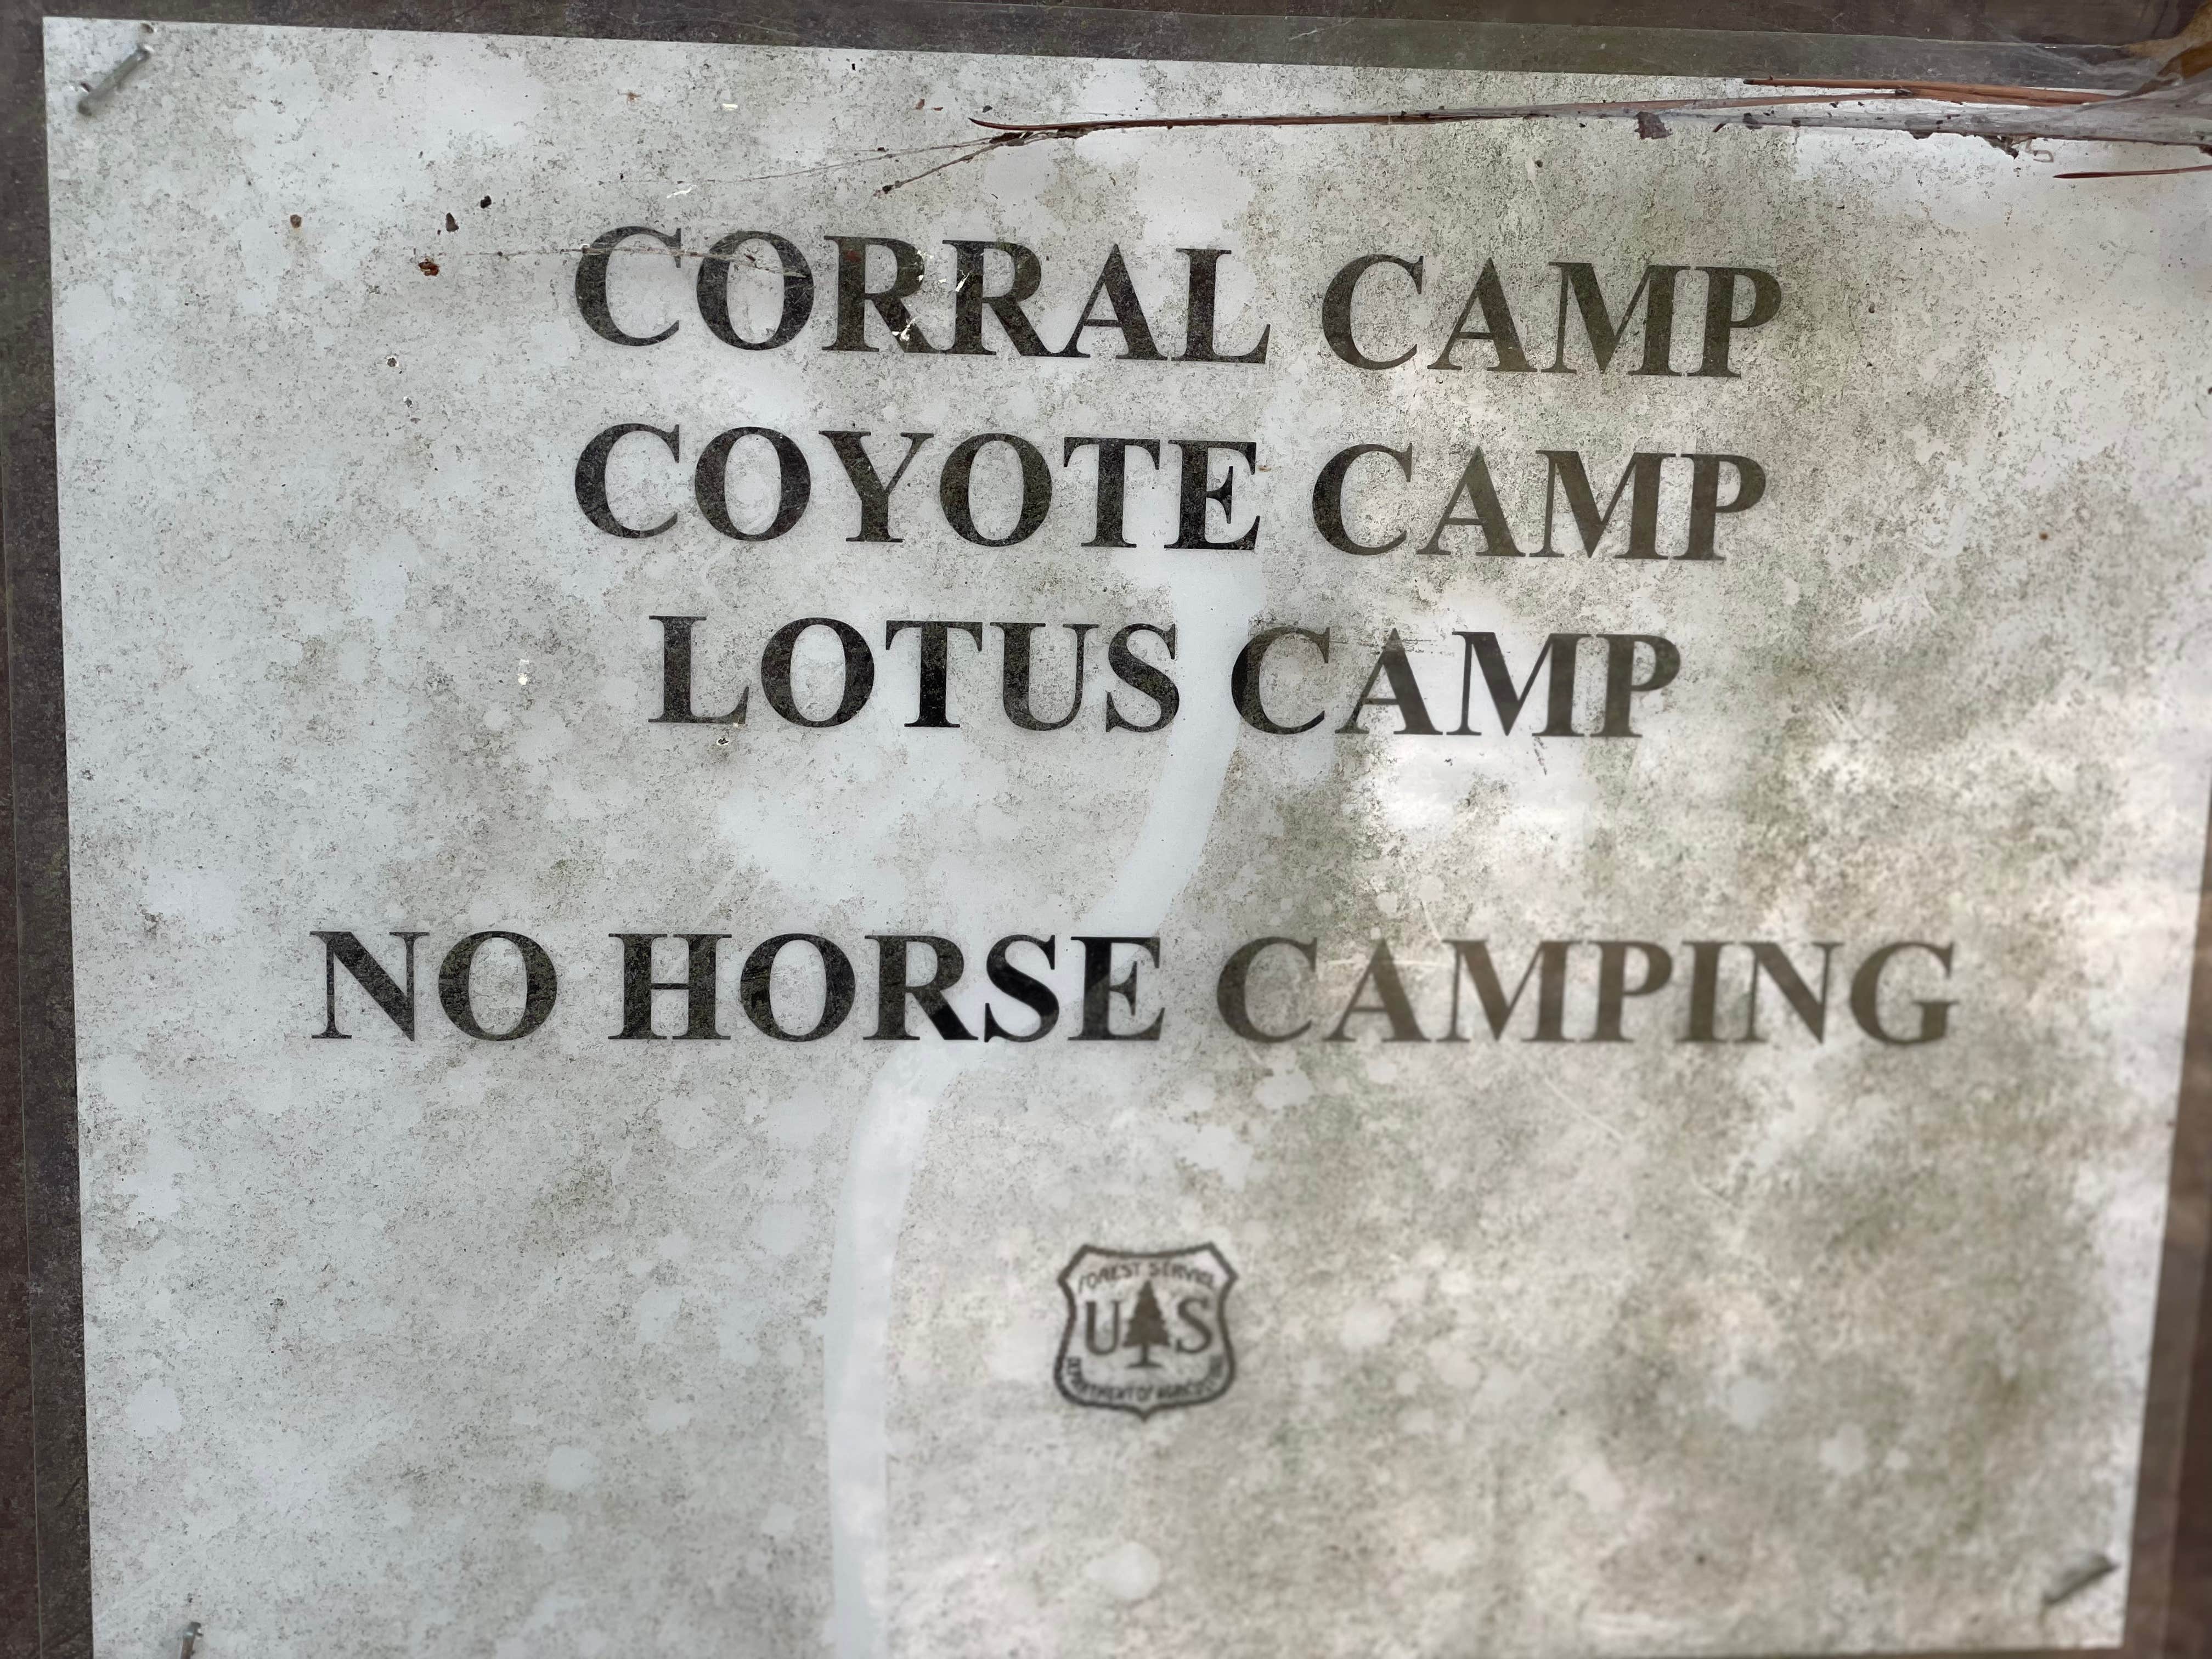 Camper submitted image from Coyote Camp - 4